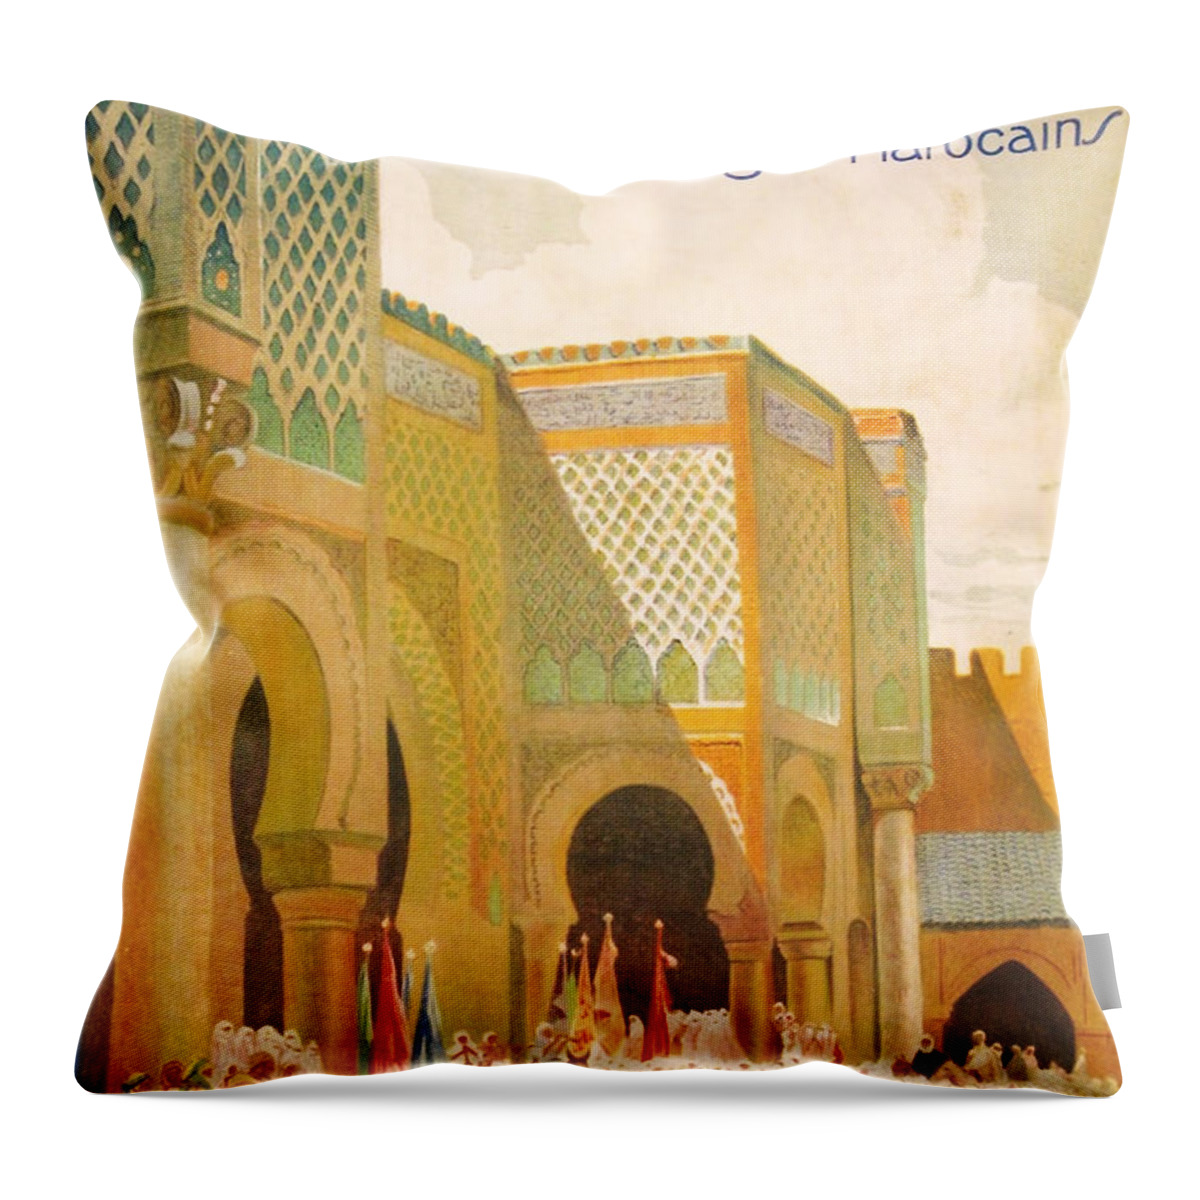 Africa Throw Pillow featuring the digital art Meknes Morocco by Georgia Clare